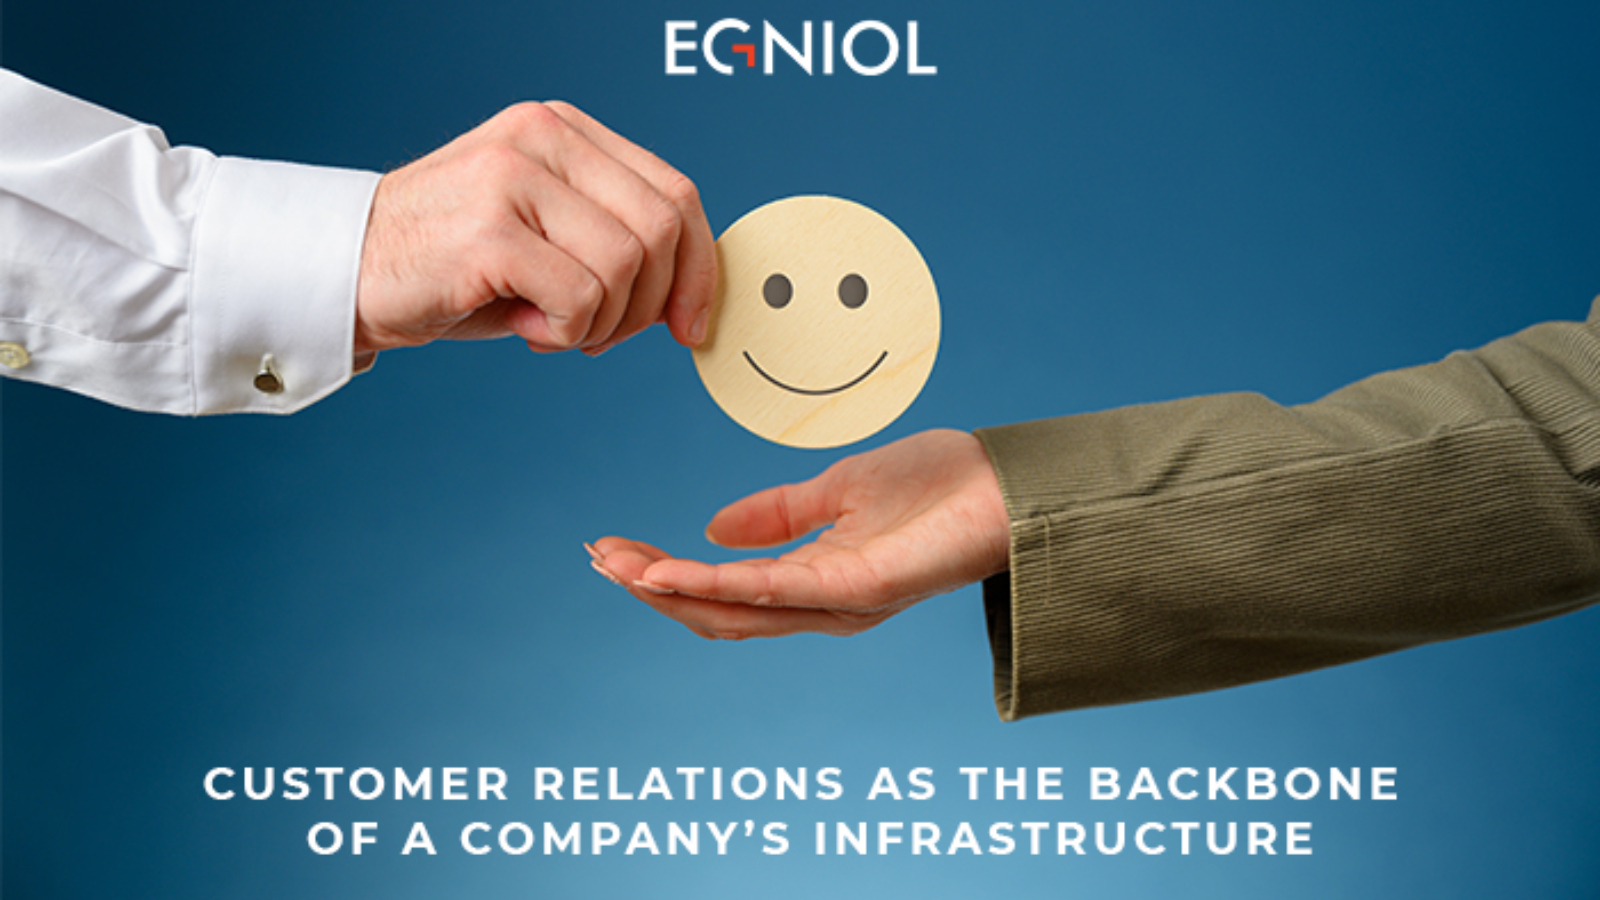 Customer Relations as the Backbone of a Company's Infrastructure - By Egniol